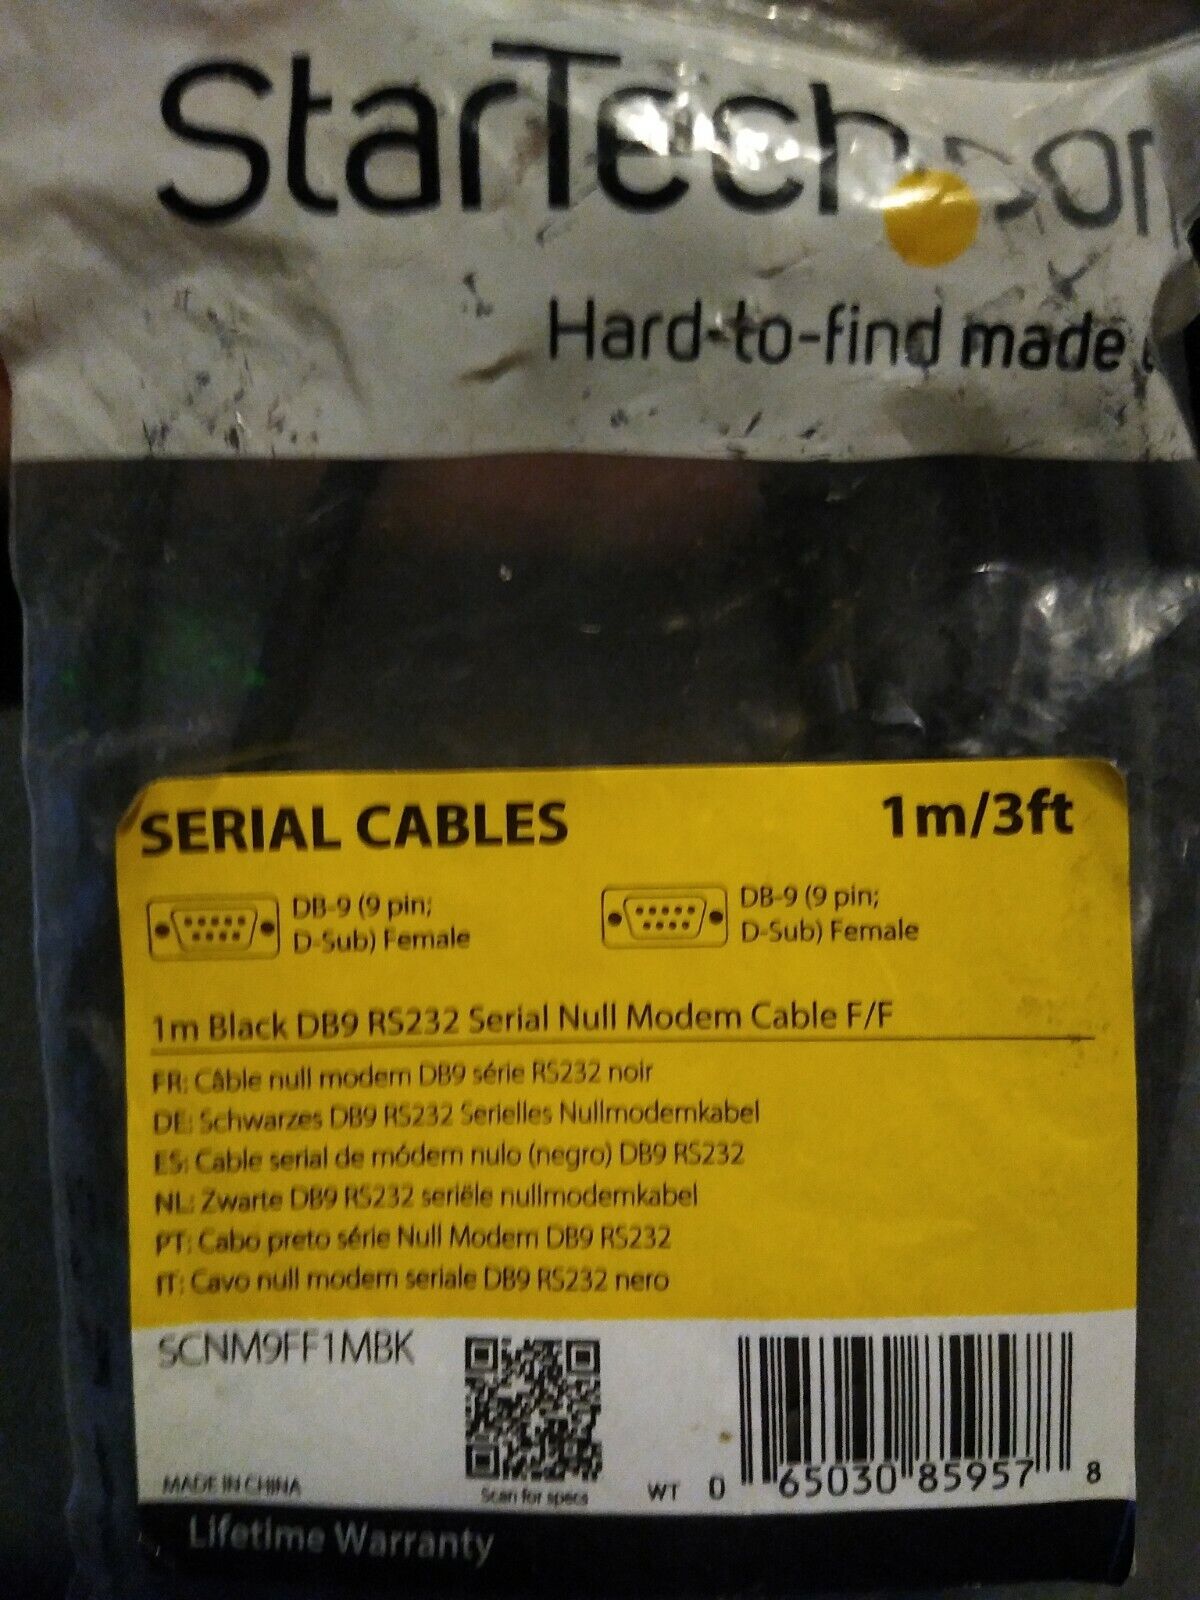 serial cables 1mblackDb9rs232nullmodem cable f/f 1 m3ft.StarTech.cm3ft.StarTech.